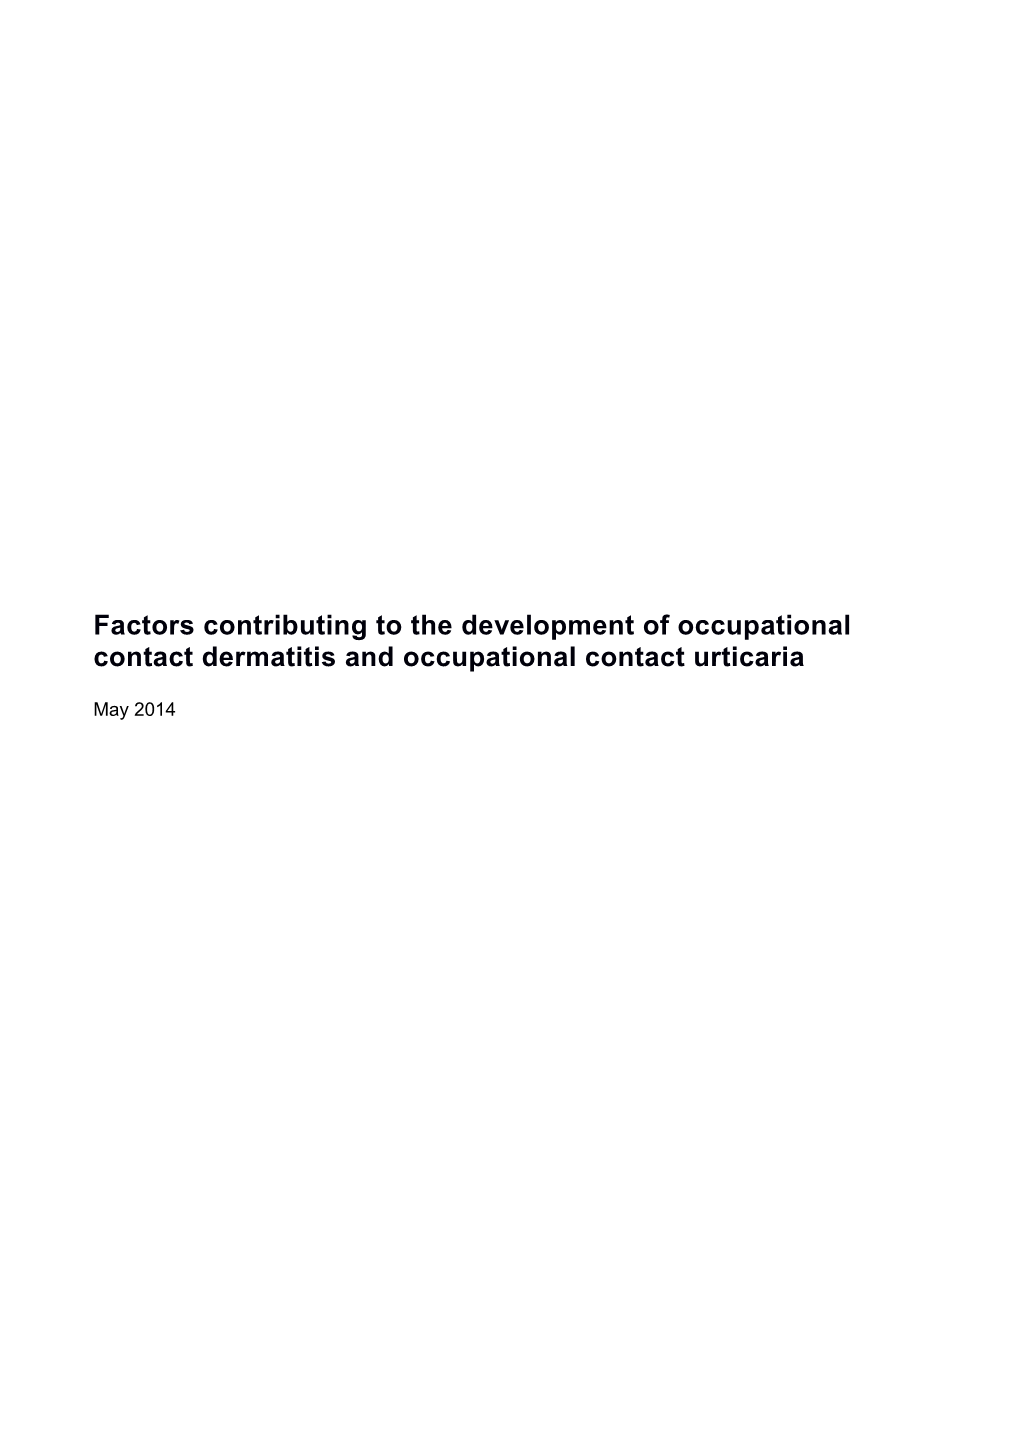 Factors Contributing to the Development of Occupational Contact Dermatitis and Occupational